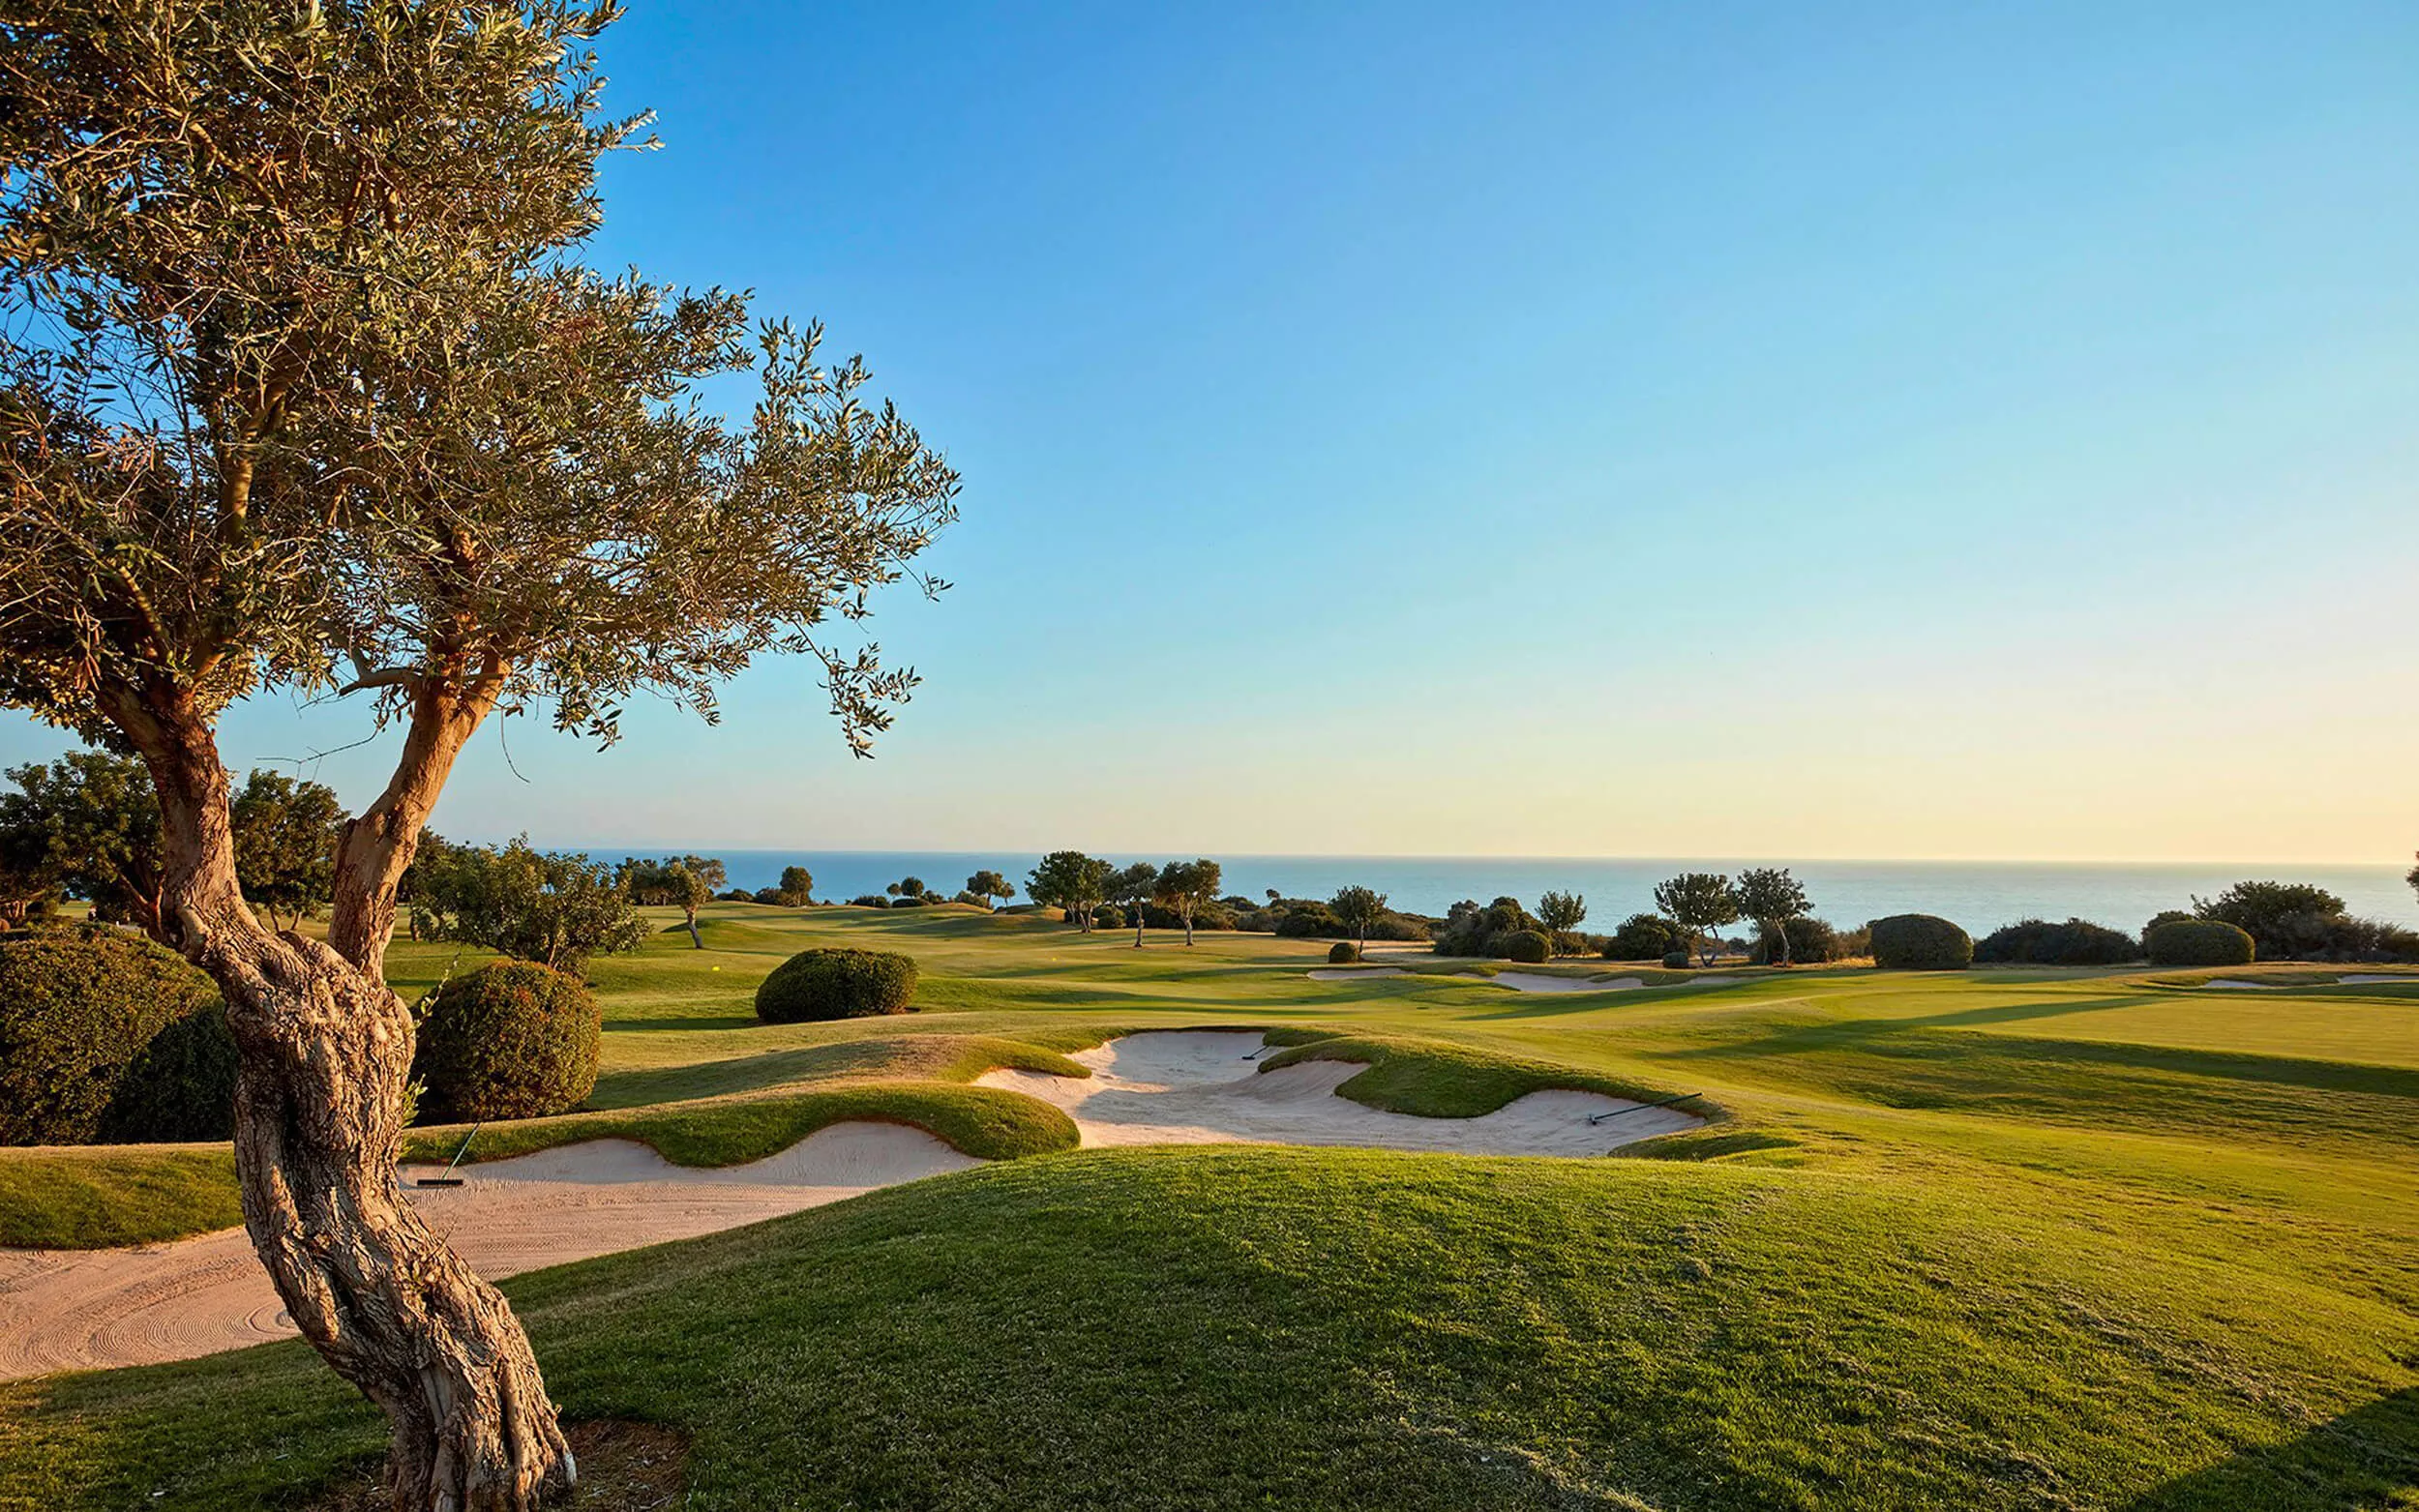 Cyprus Golf Academy in Cyprus, Europe | Golf - Rated 0.9